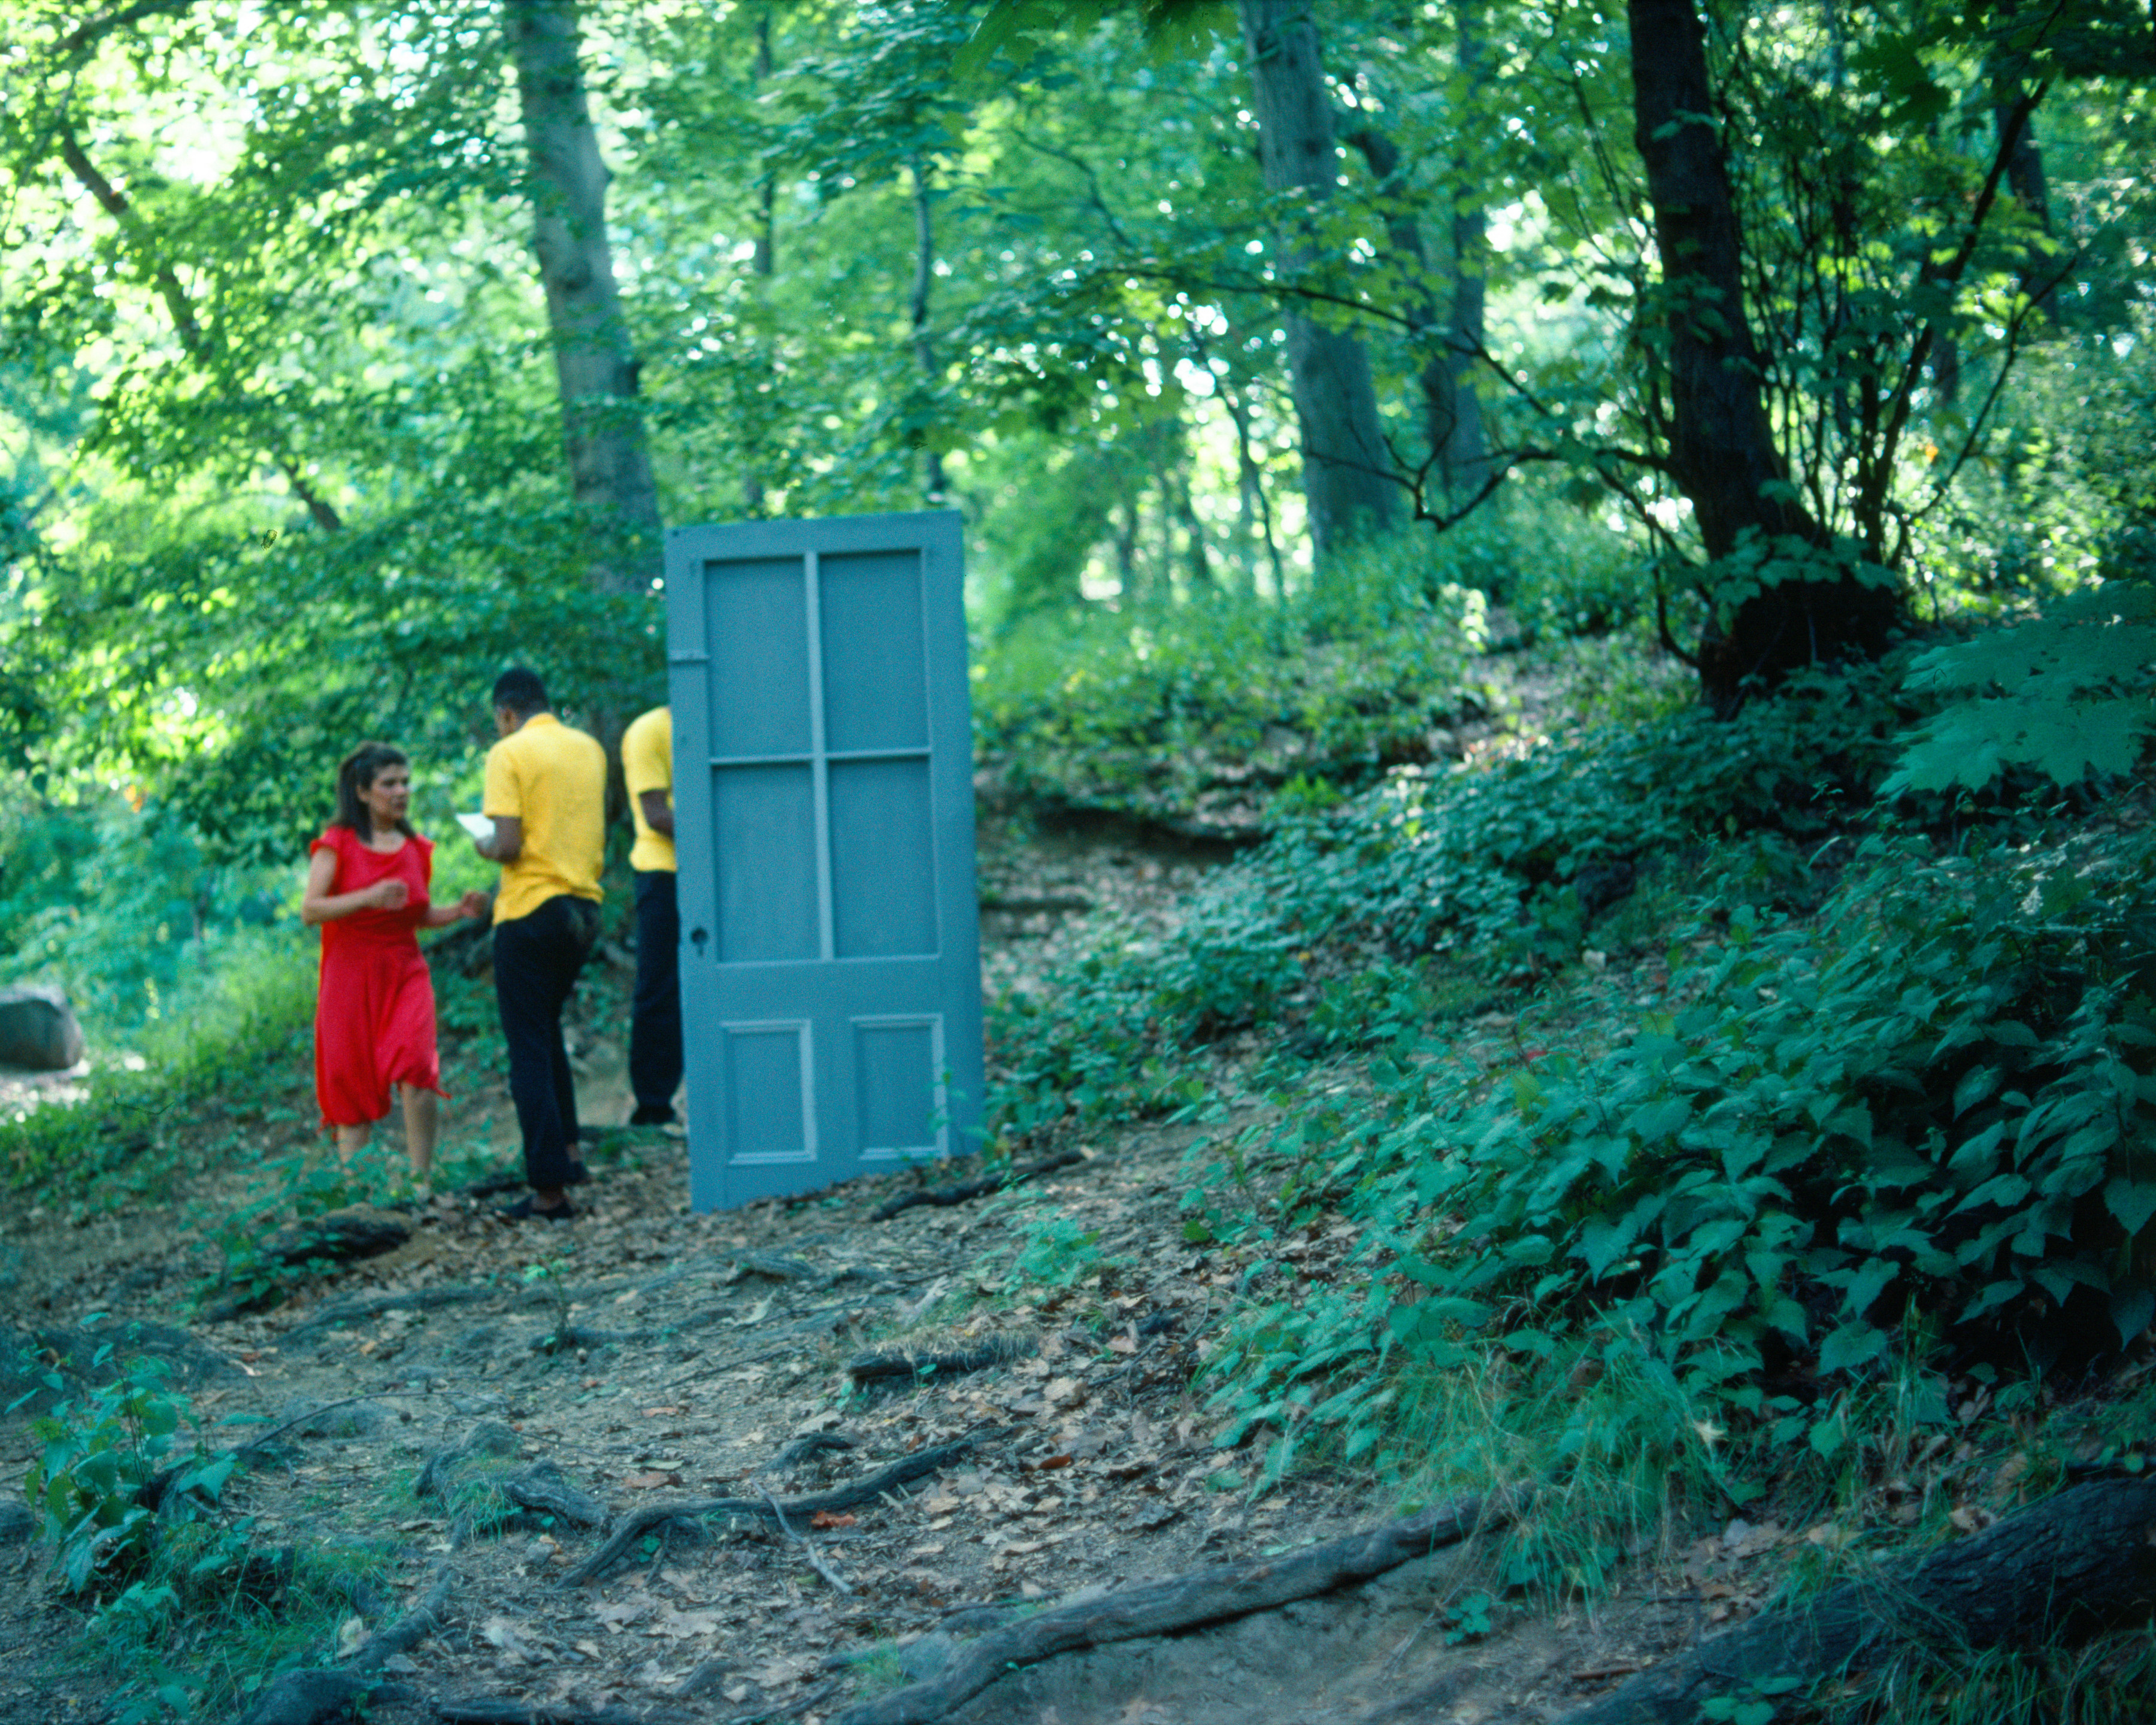 Rivers, First Draft: The Woman in Red tries to join the Black Male Artists but is ejected by them, 1982/2015, Digital C-print from Kodachrome 35mm slides in 48 parts, 16h x 20w in (40.64h x 50.80w cm)